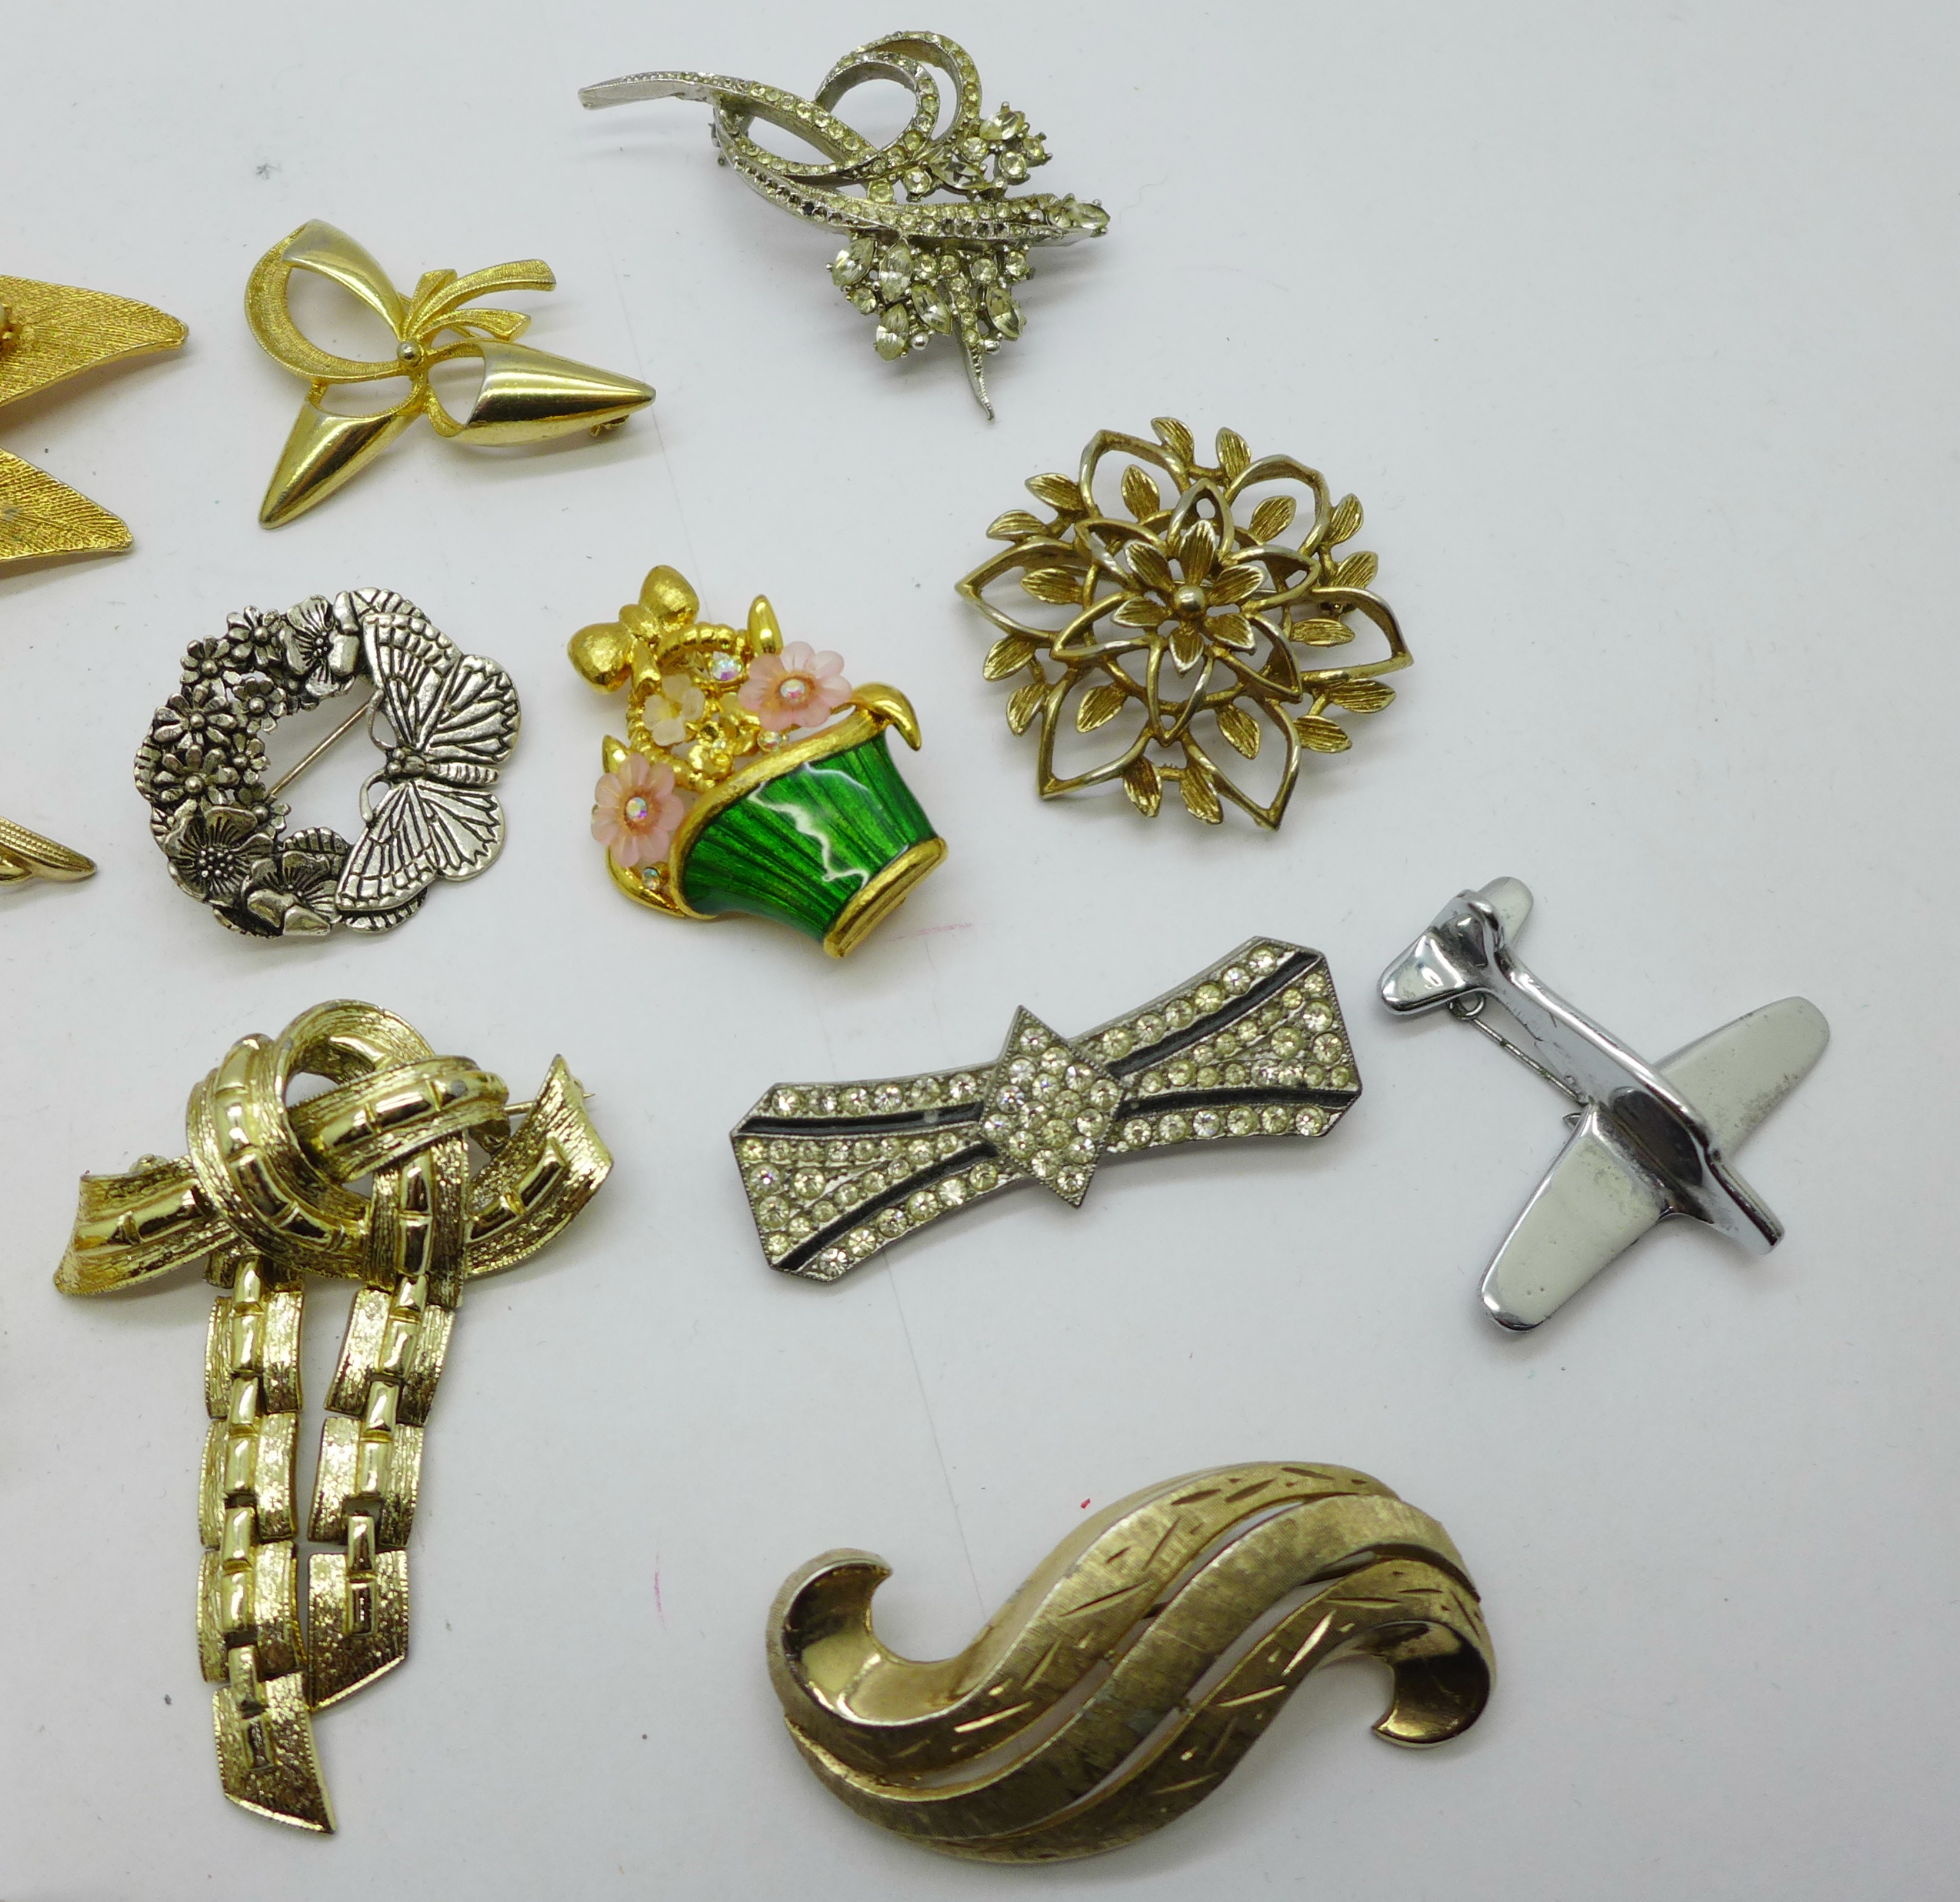 A Spitfire/aircraft sweetheart brooch, costume jewellery including large cross pendant and a - Image 3 of 3